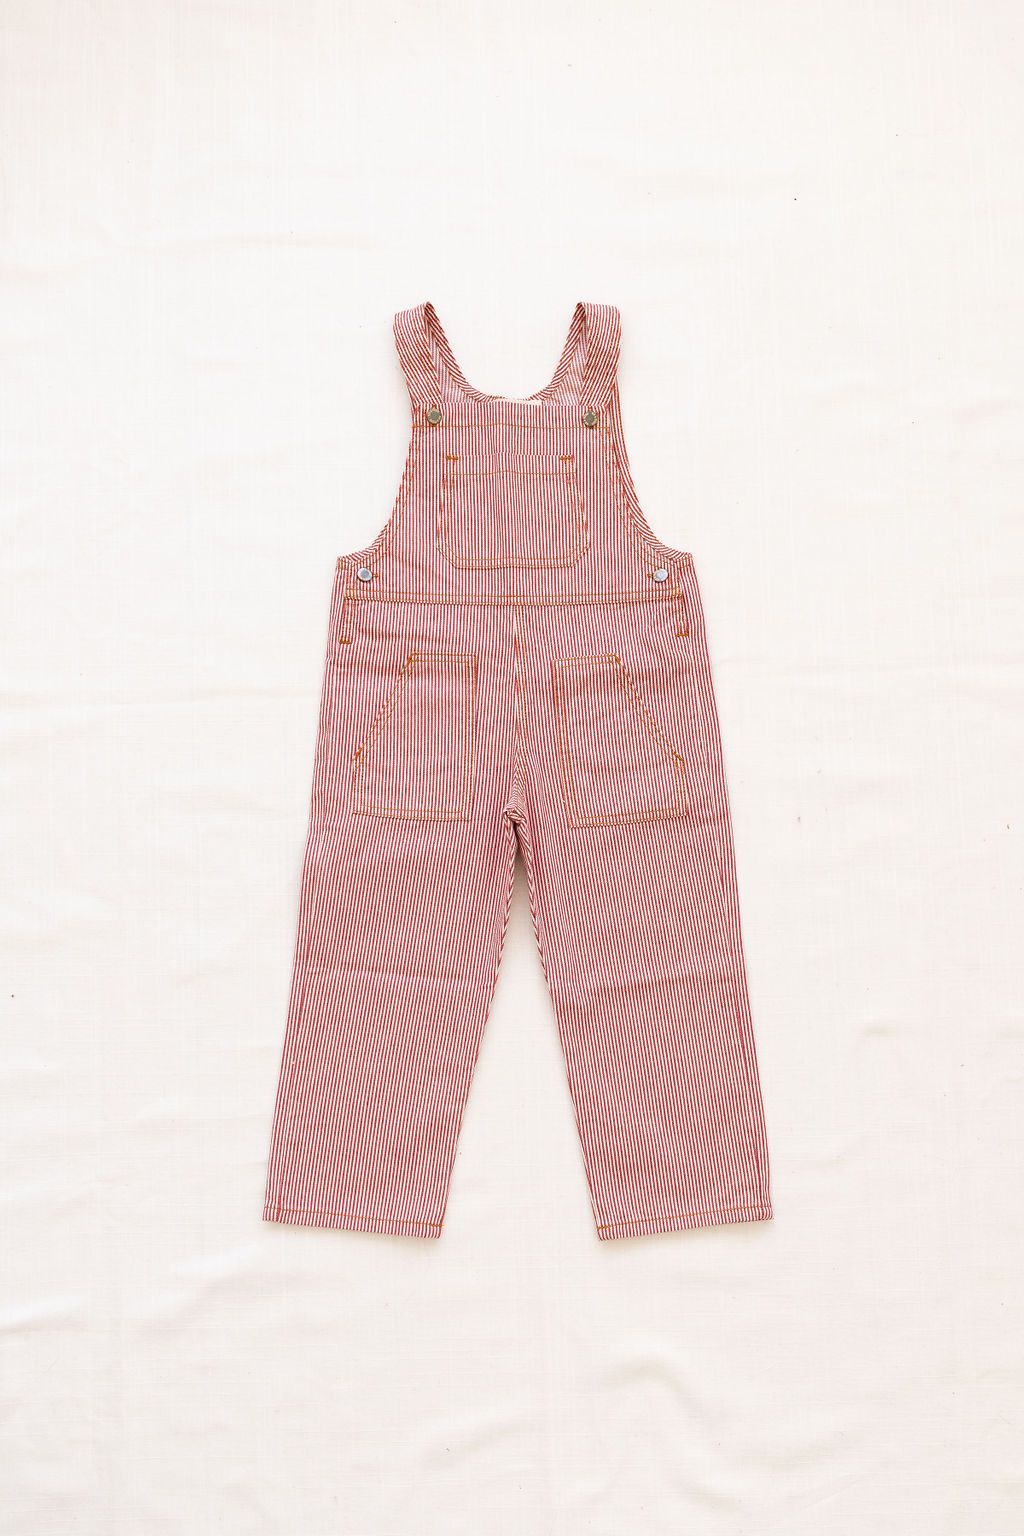 Fin and Vince Classic Overalls Chili Stripes | 30% OFF | Children of the Wild